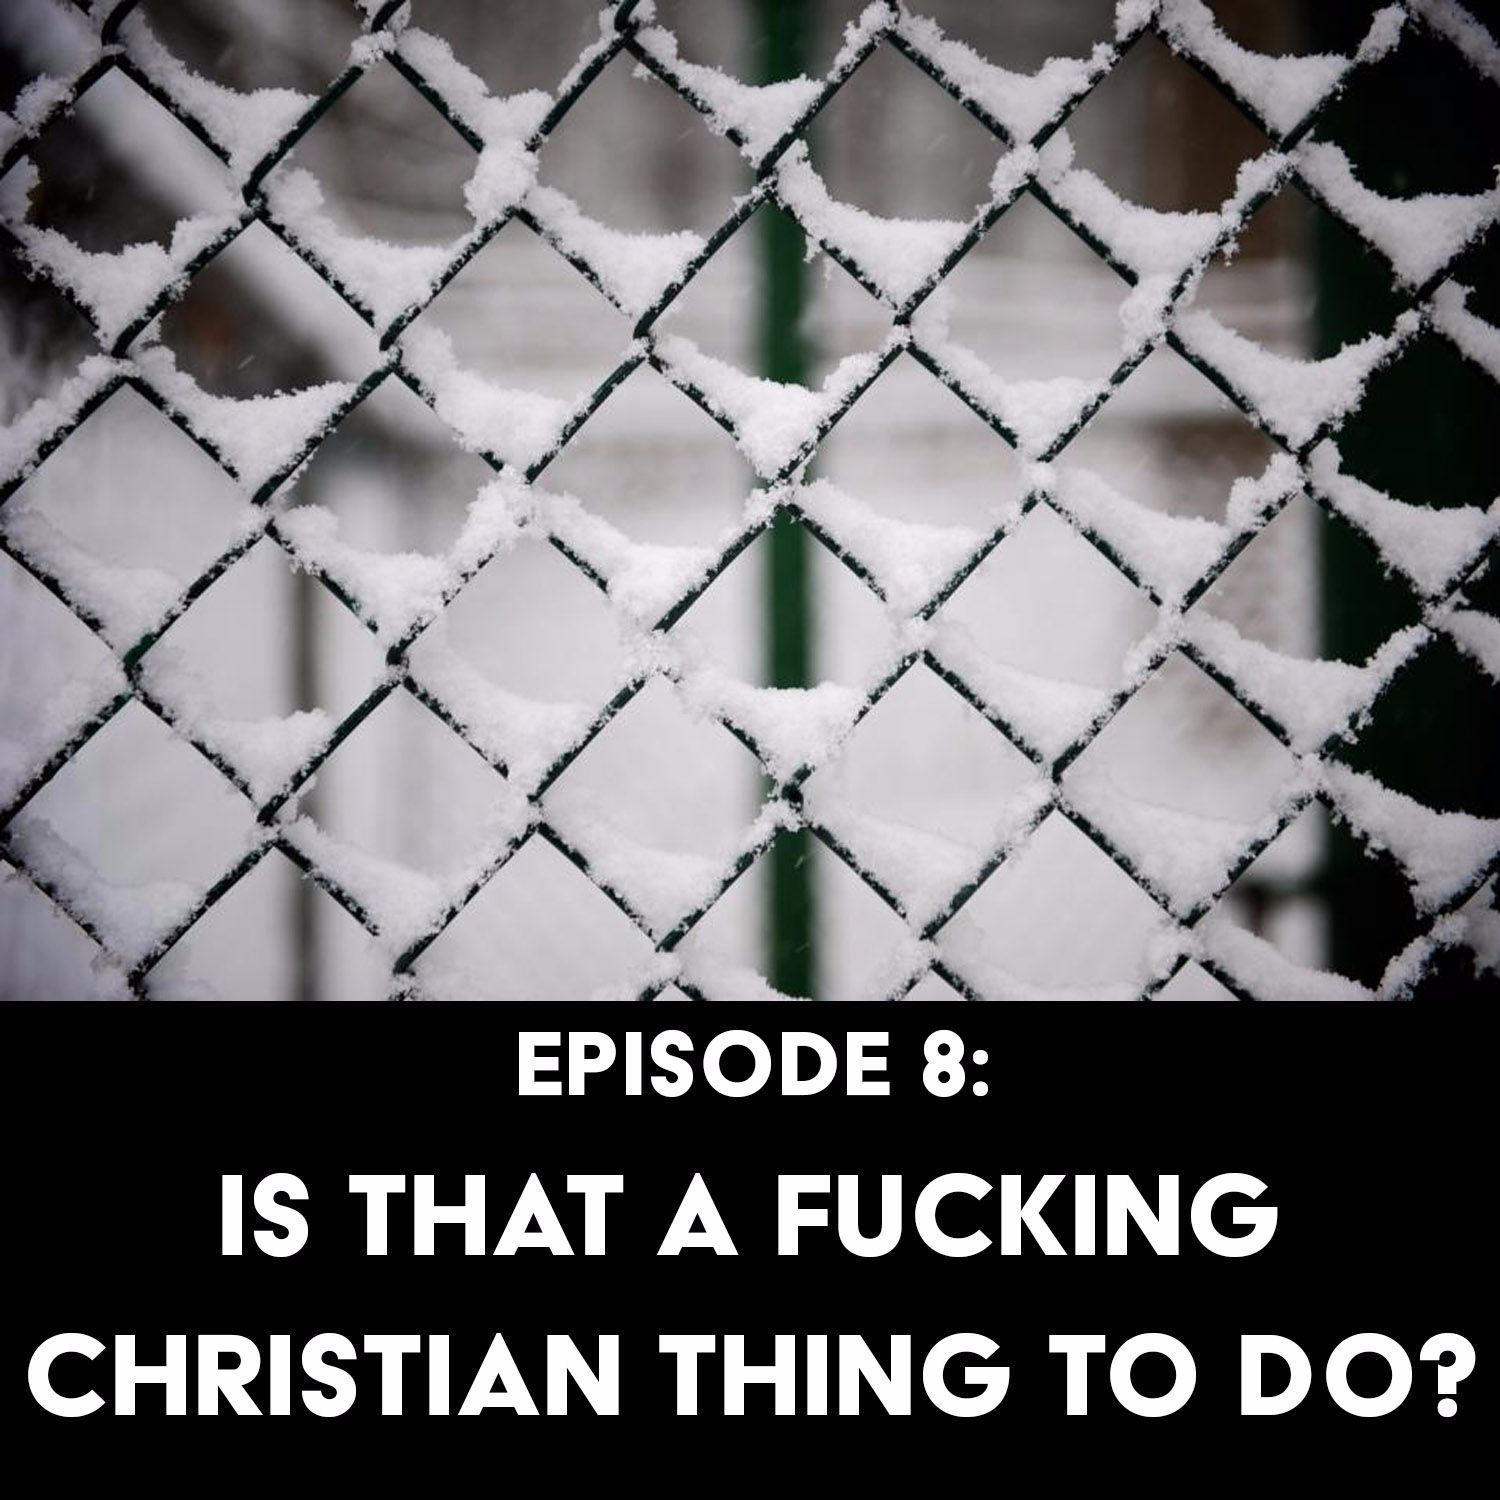 S1 Ep8: Is That a Fucking Christian Thing to Do?